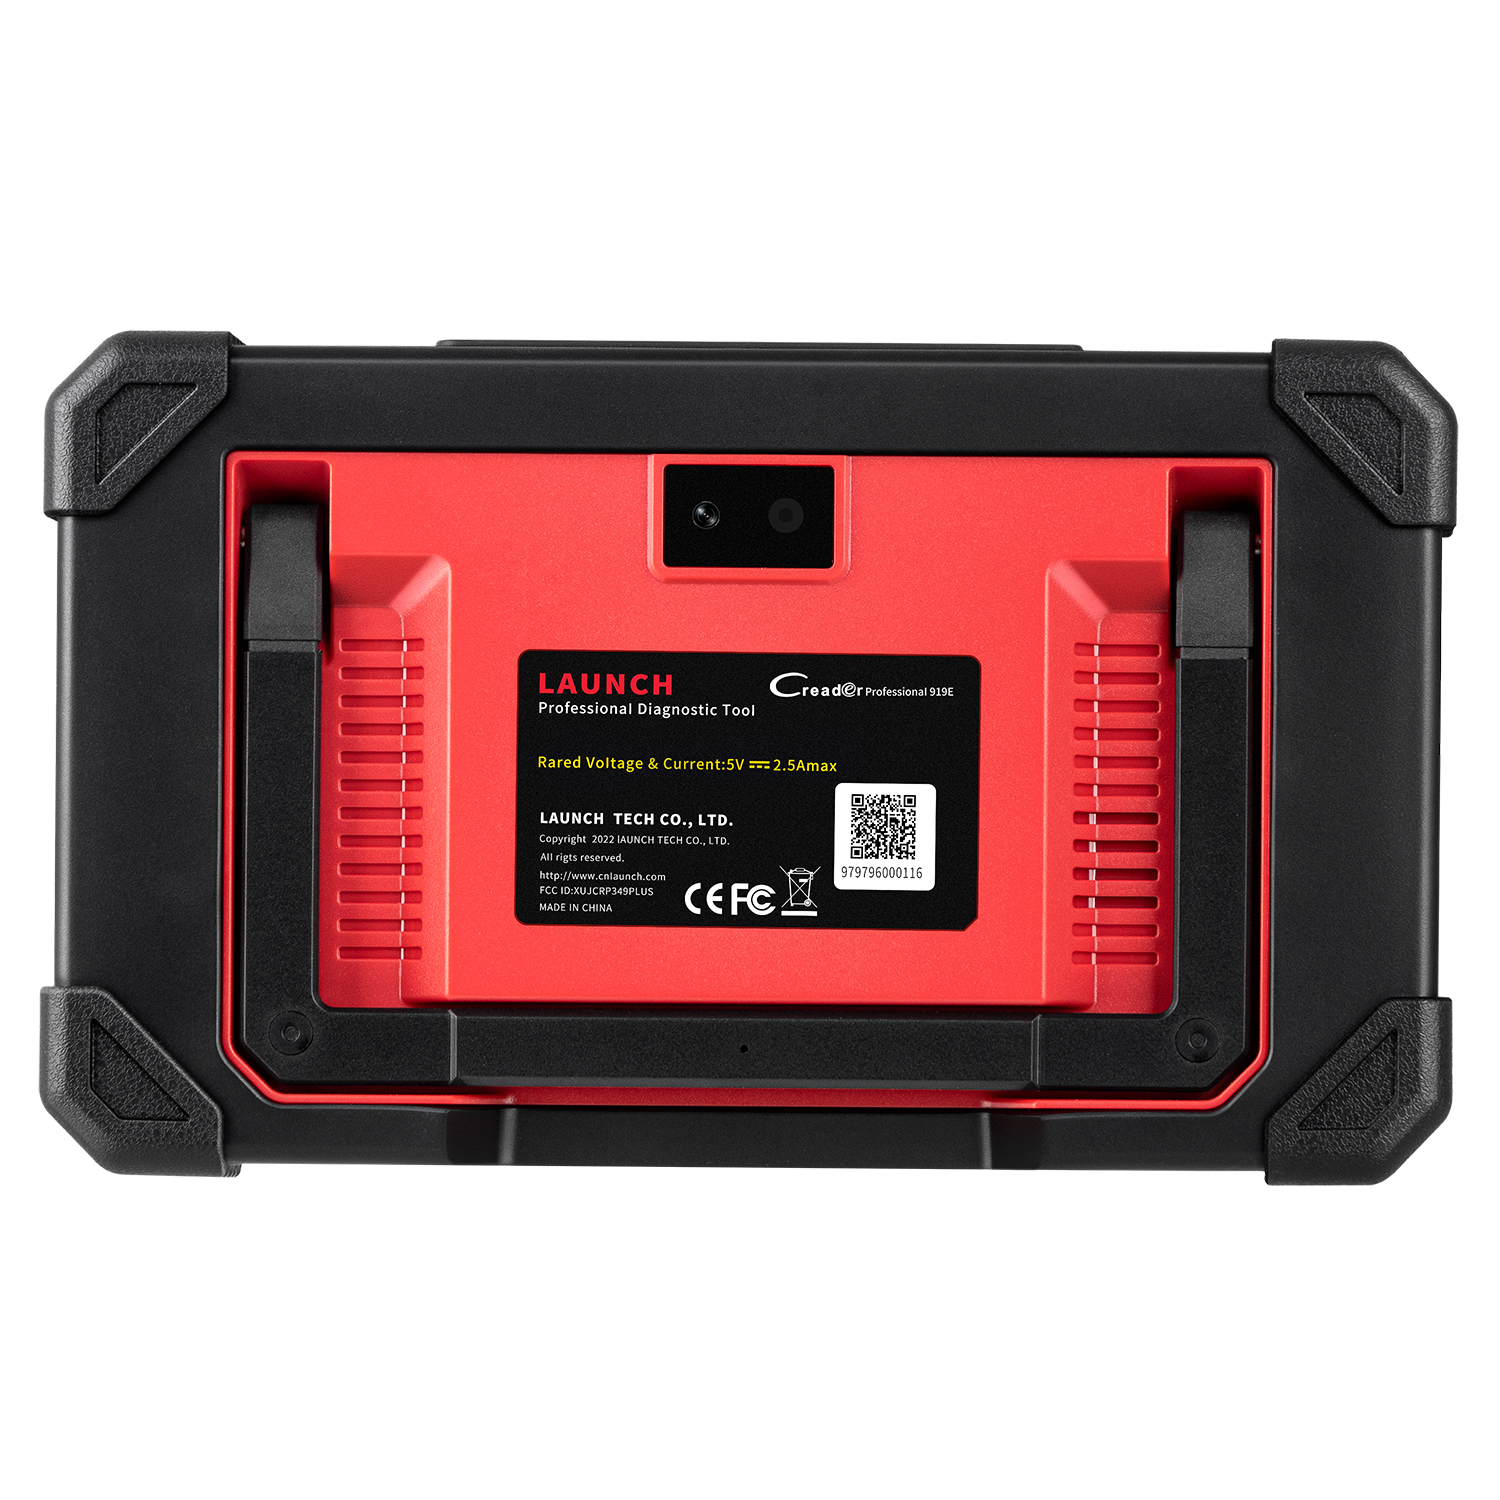 2022-New-LAUNCH-X431-CRP919E-All-System-Automotive-OBD2-Scanner-Car-Diagnostic-Scan-Tool-Active-Test-CANFDDIOP-with-29-Reset-1005004490114684